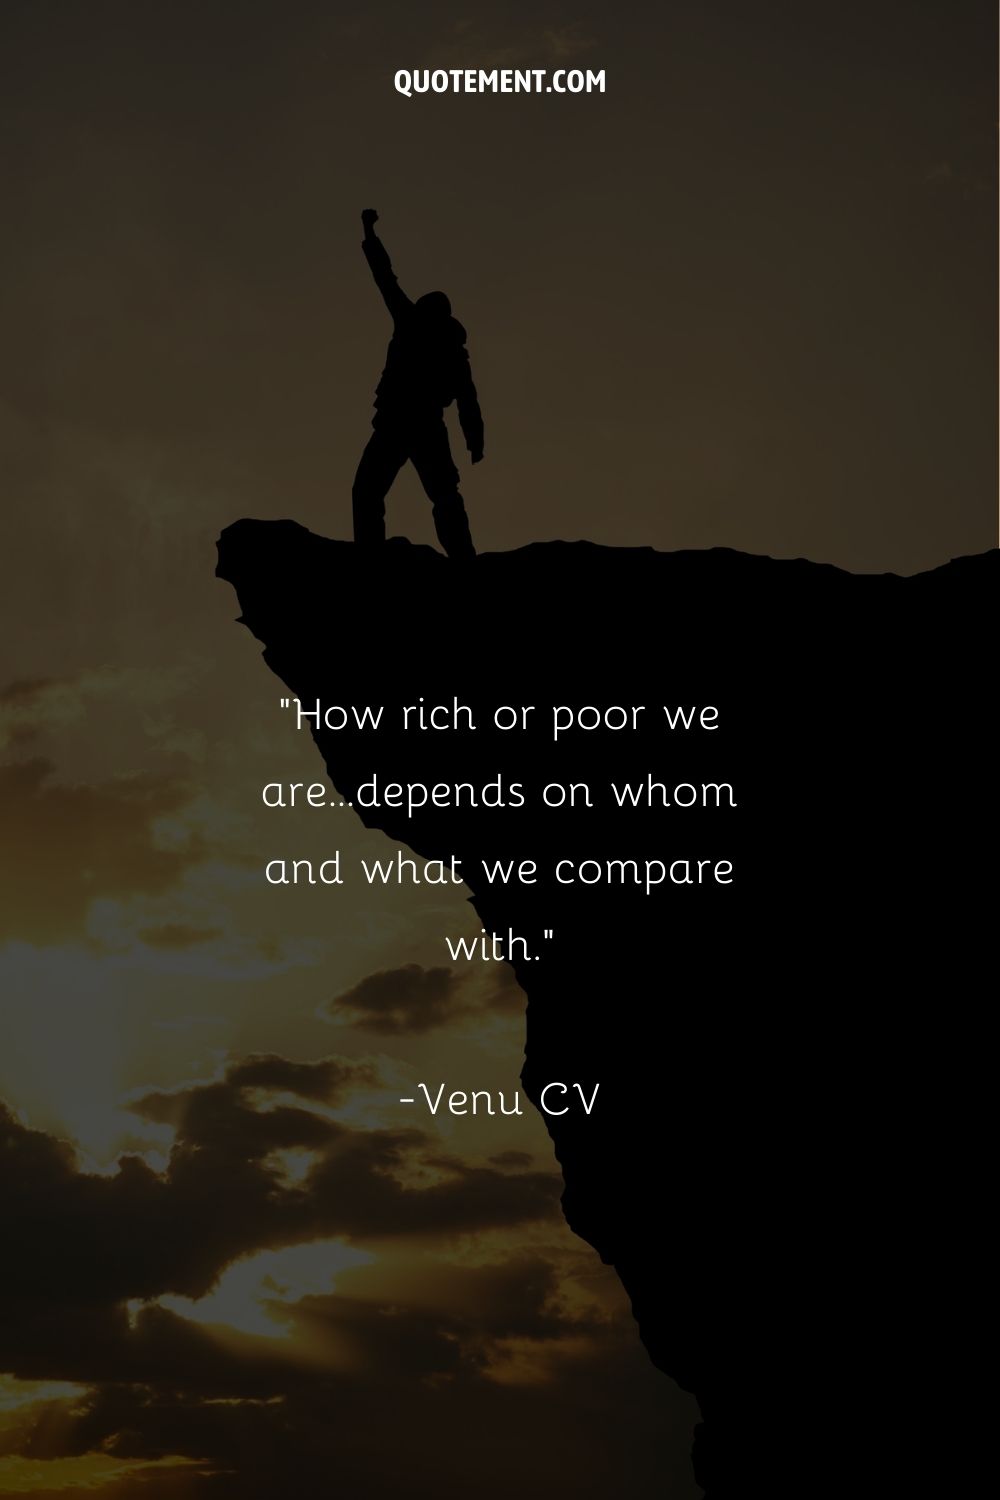 How rich or poor we are...depends on whom and what we compare with